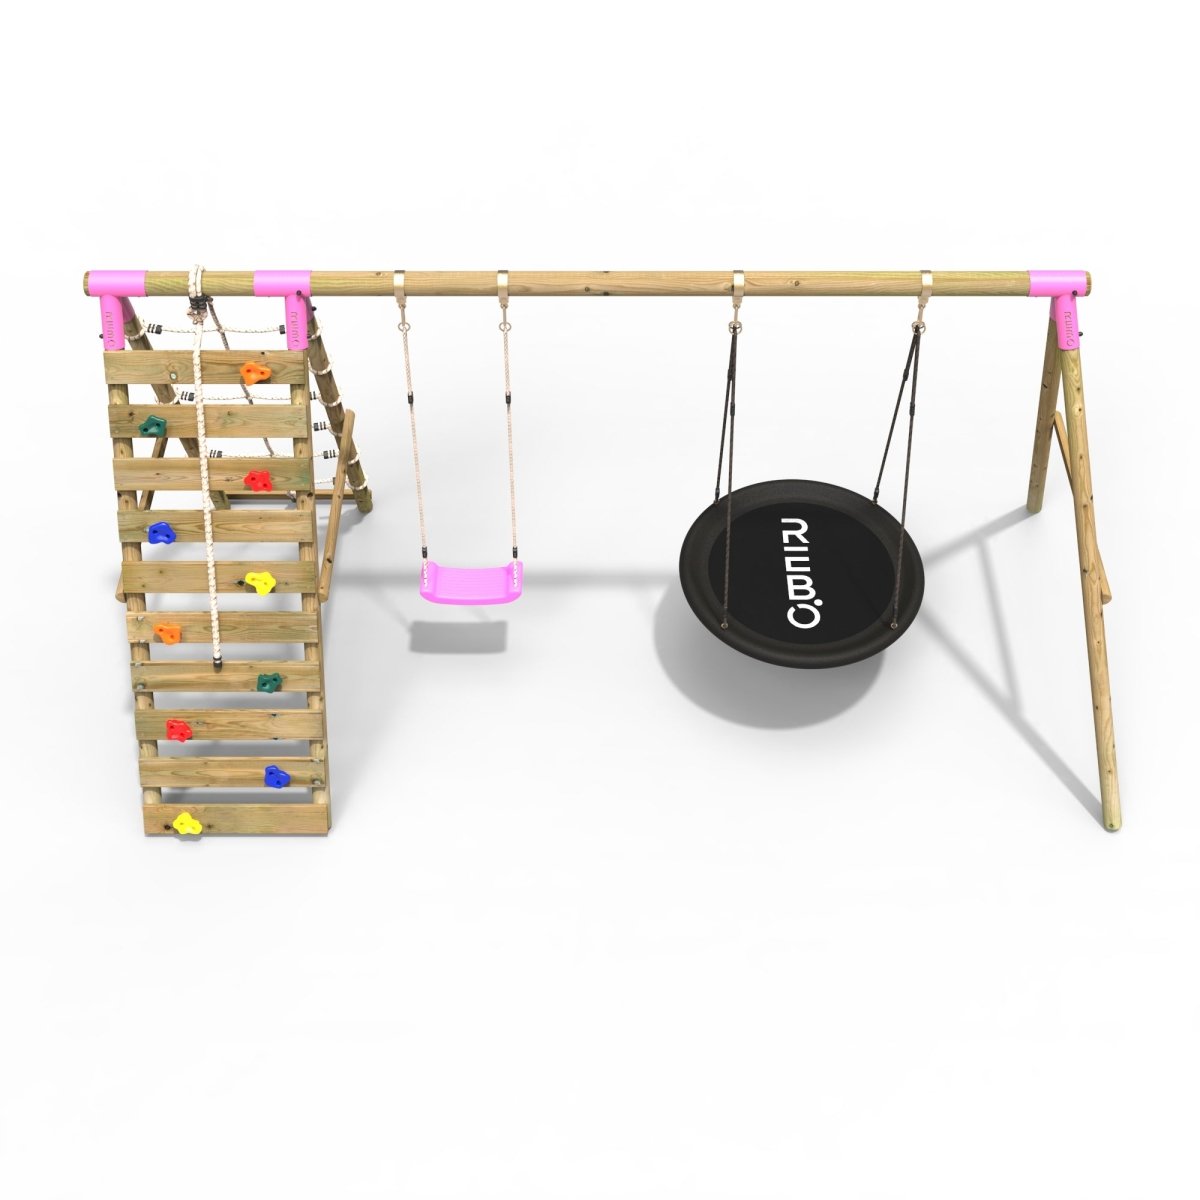 Rebo Wooden Swing Set with Up and Over Climbing Wall - Vale Pink